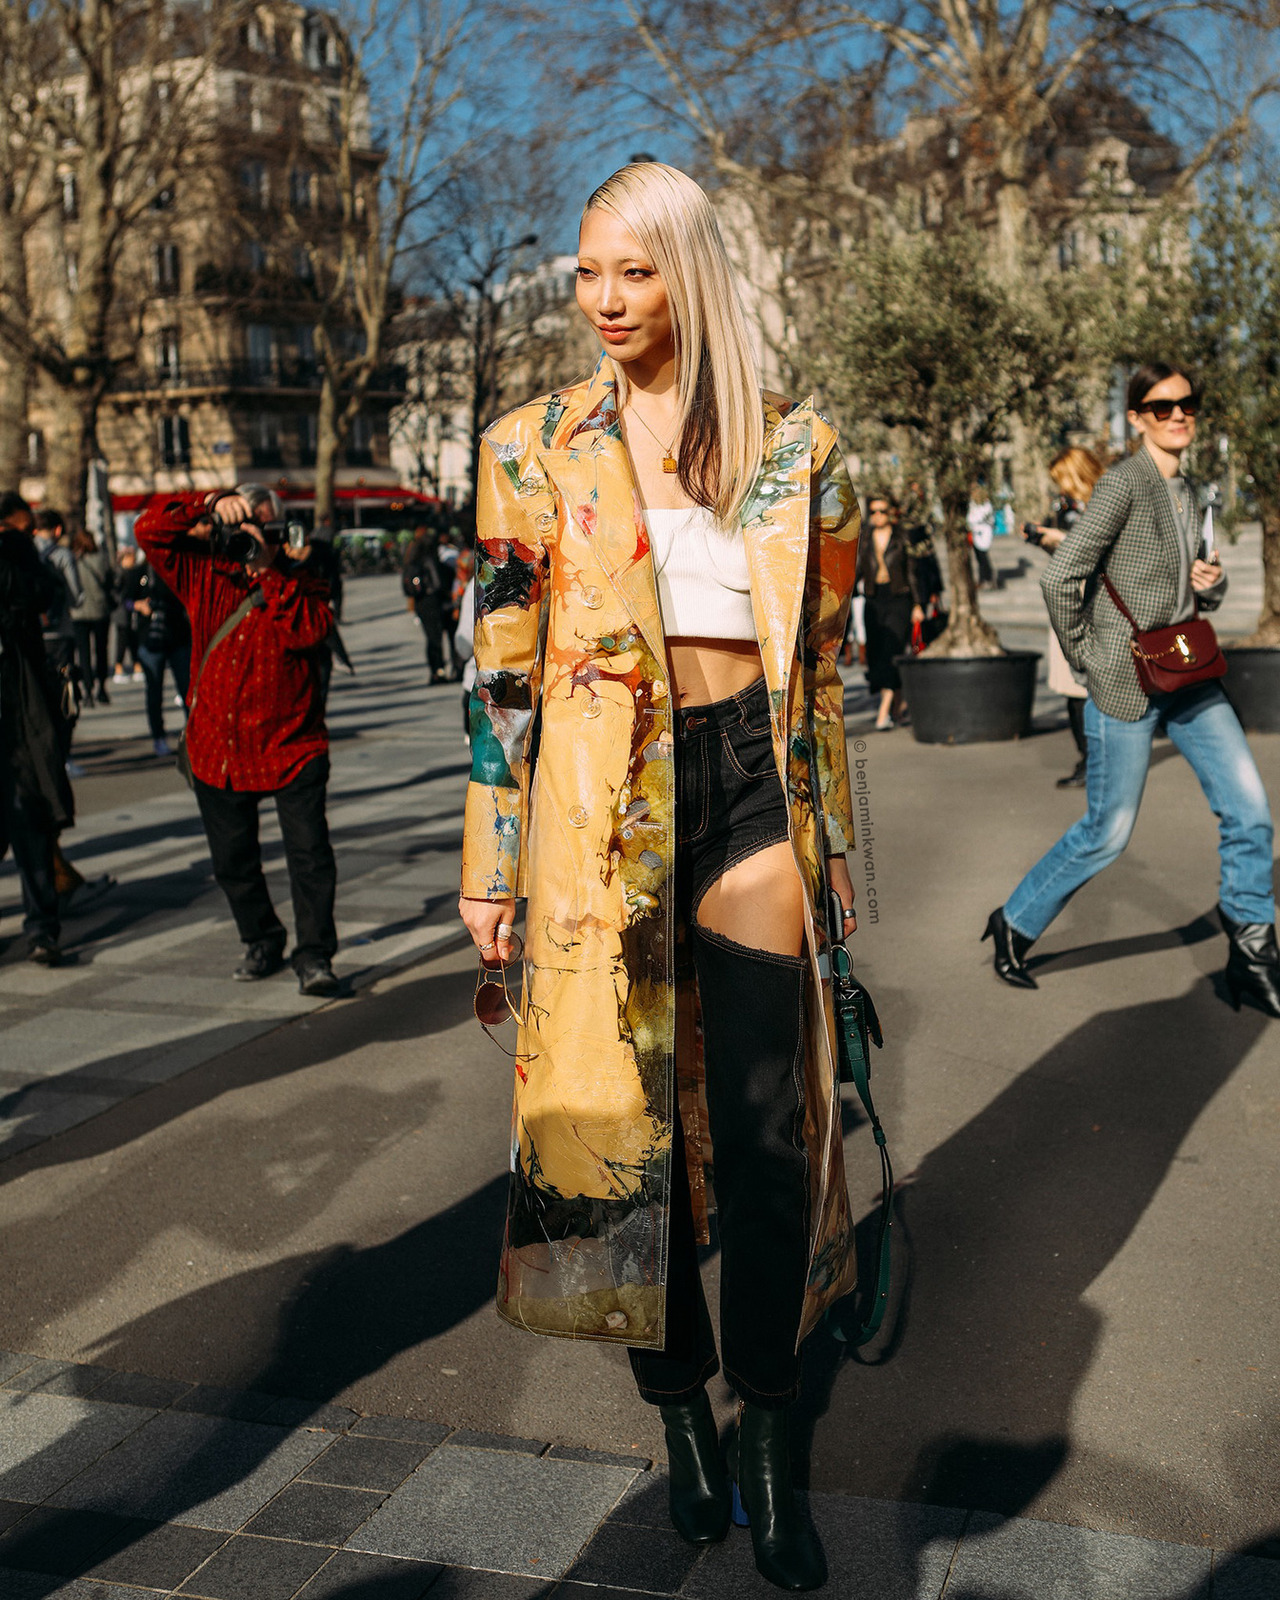 Image result for soo joo park 2019